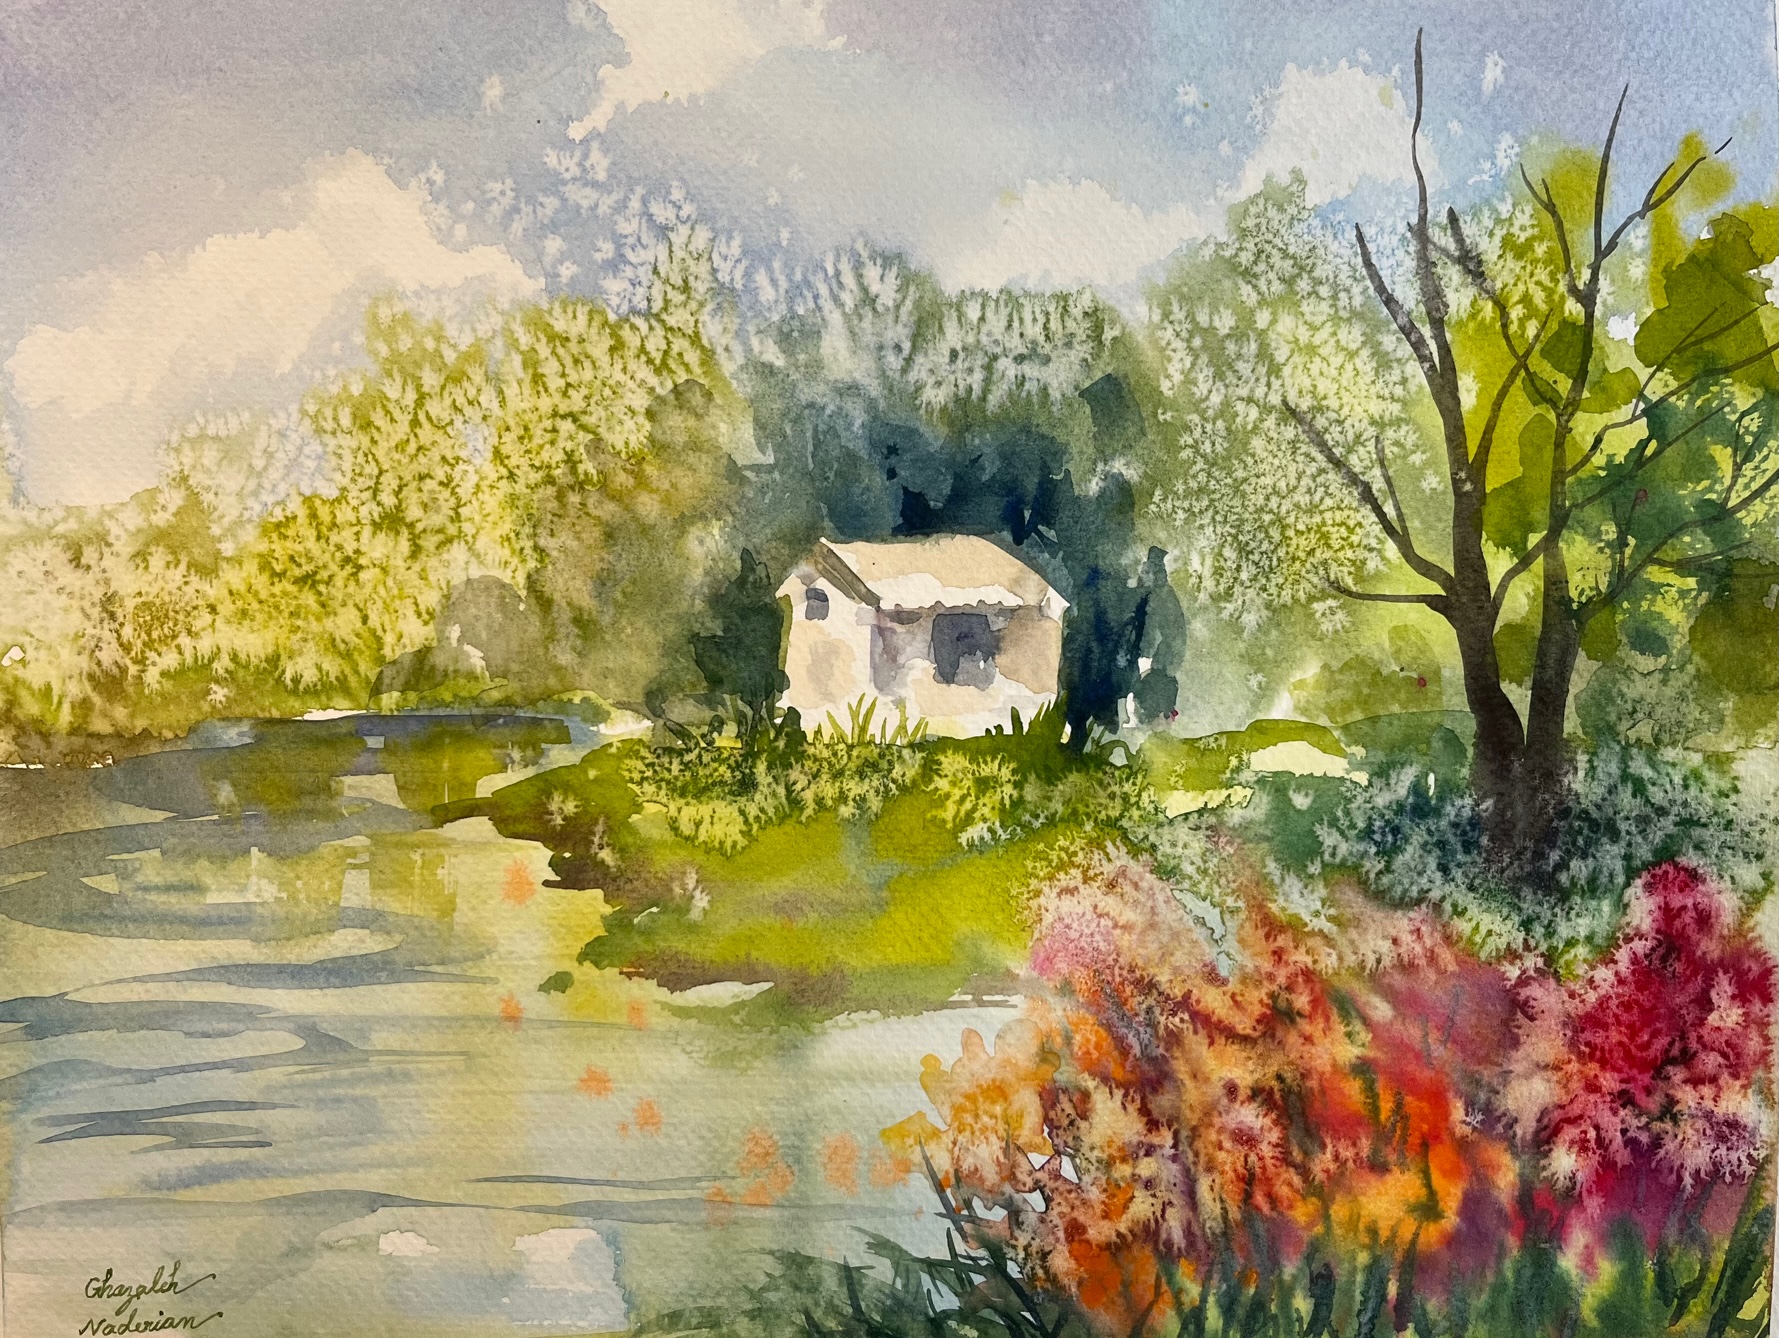 A Watercolor Warm Landscape  experience project by Yaymaker